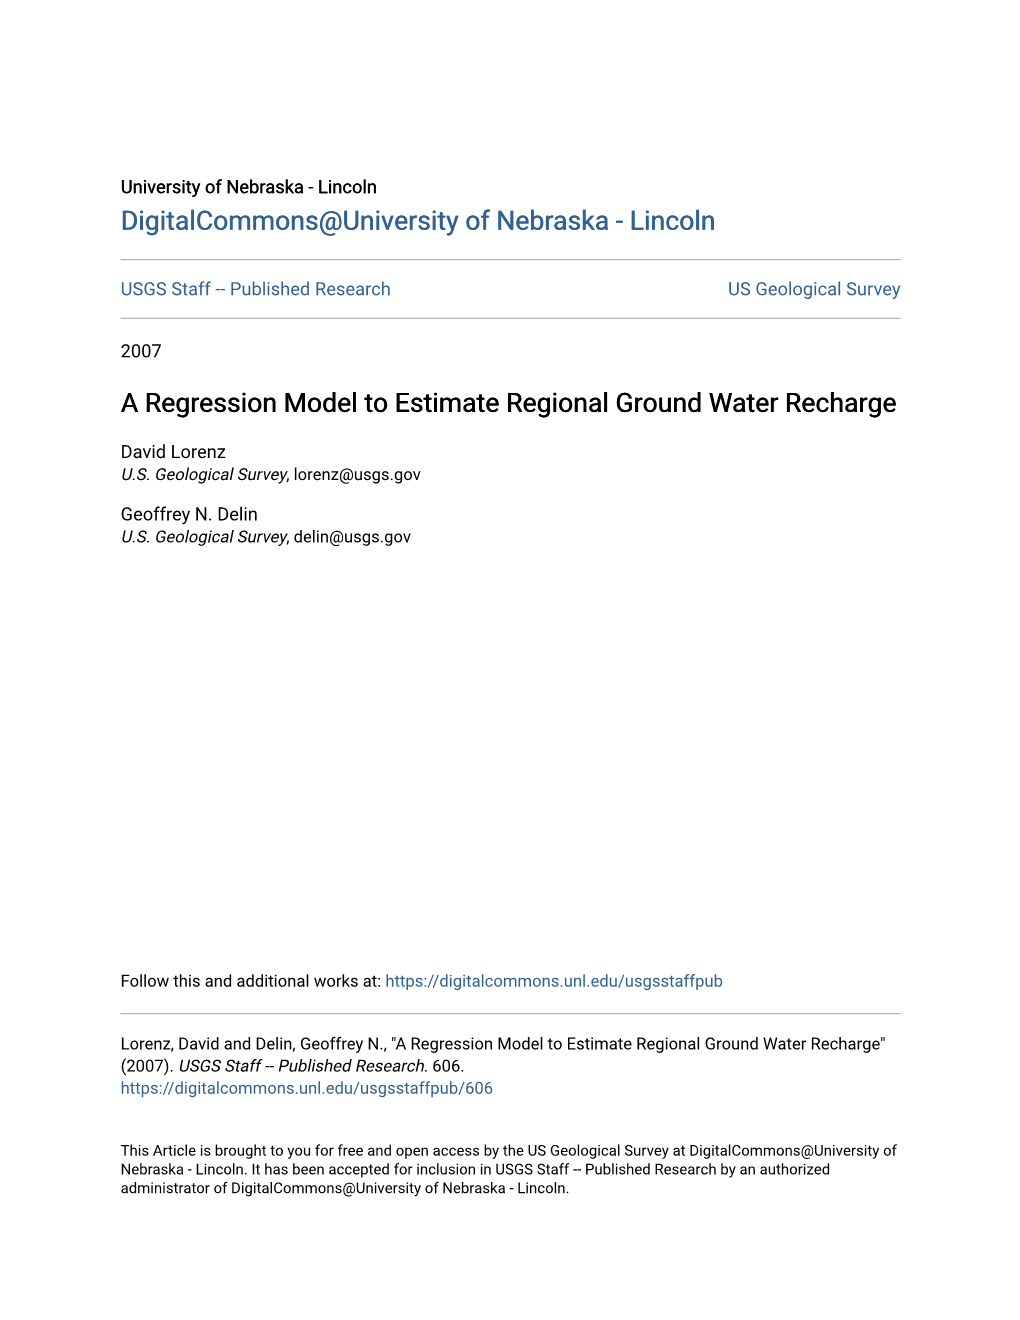 A Regression Model to Estimate Regional Ground Water Recharge